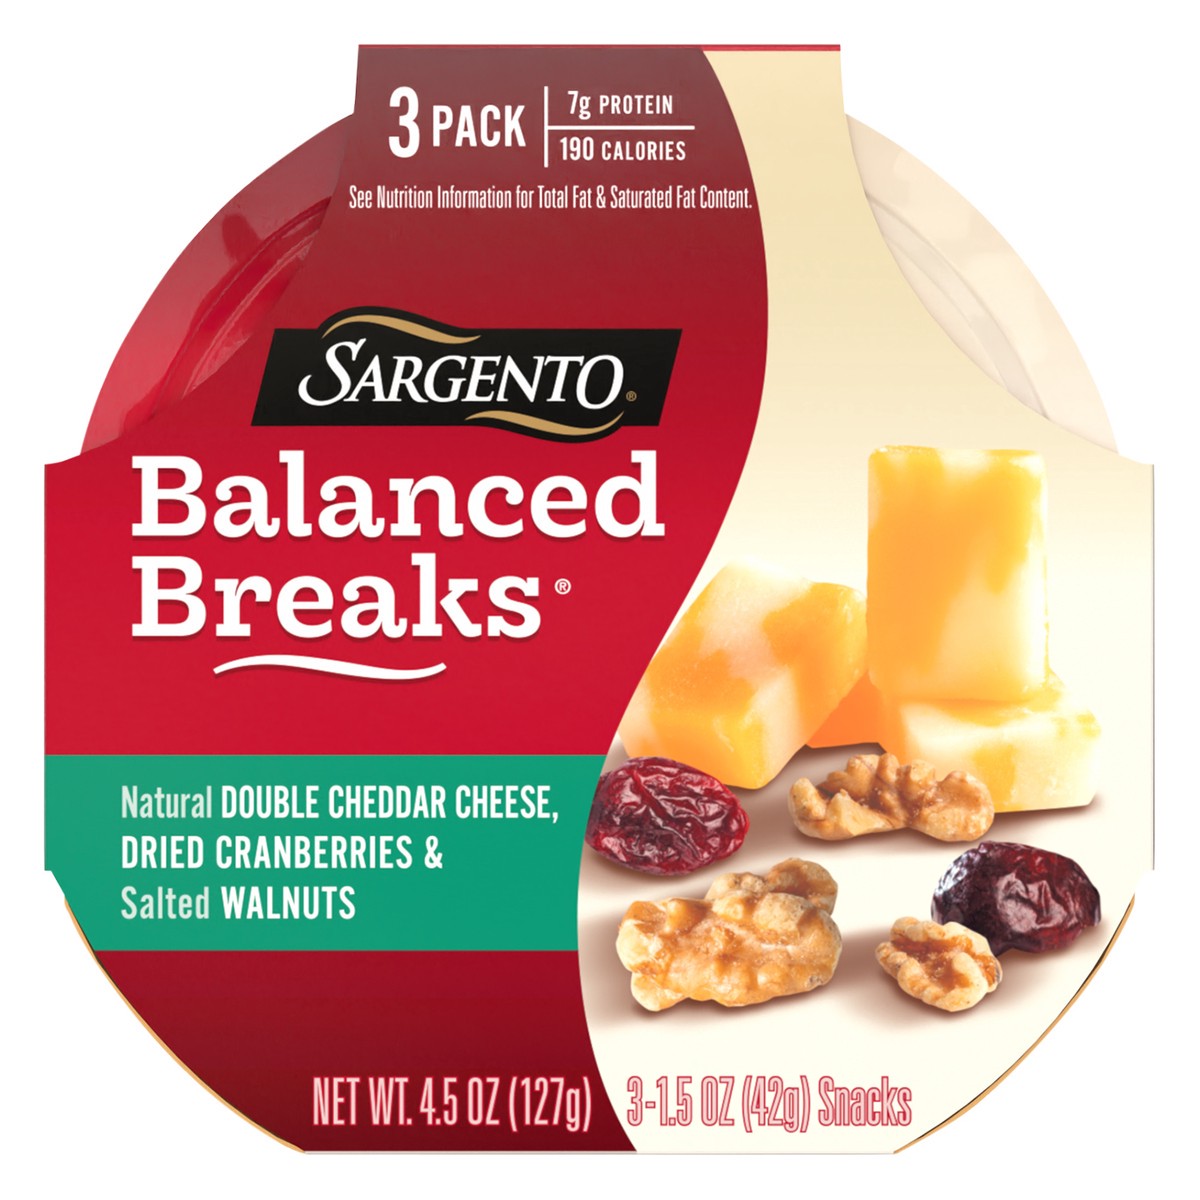 slide 11 of 14, Sargento Balanced Breaks with Natural Double Cheddar Cheese, Dried Cranberries and Salted Walnuts, 1.5 oz., 3-Pack, 4.5 oz